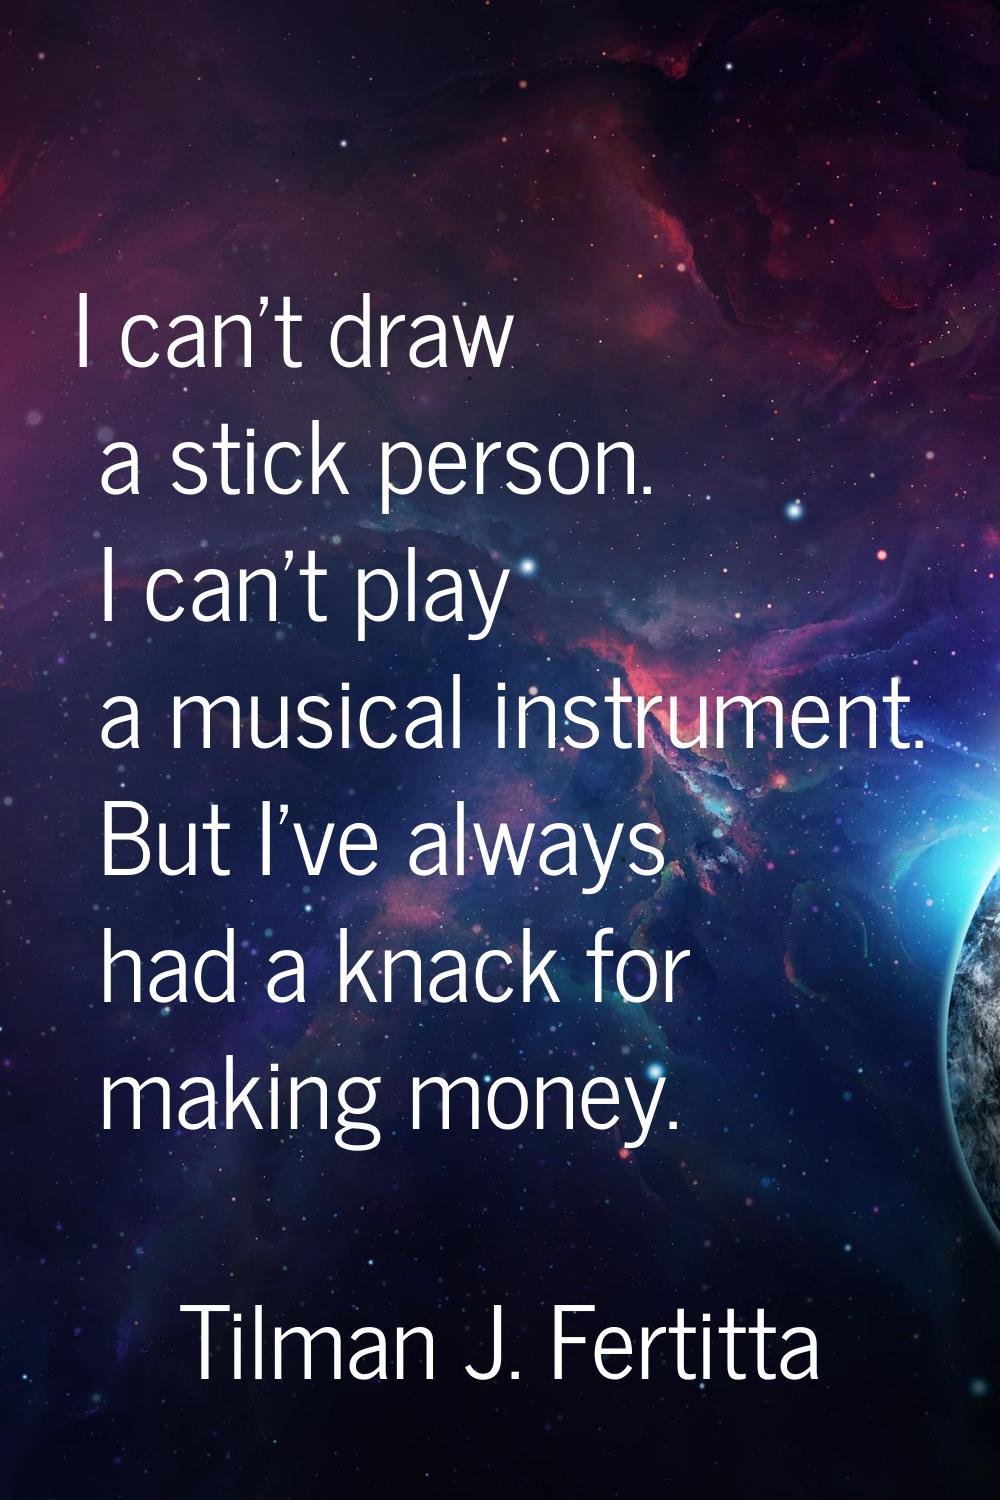 I can't draw a stick person. I can't play a musical instrument. But I've always had a knack for mak